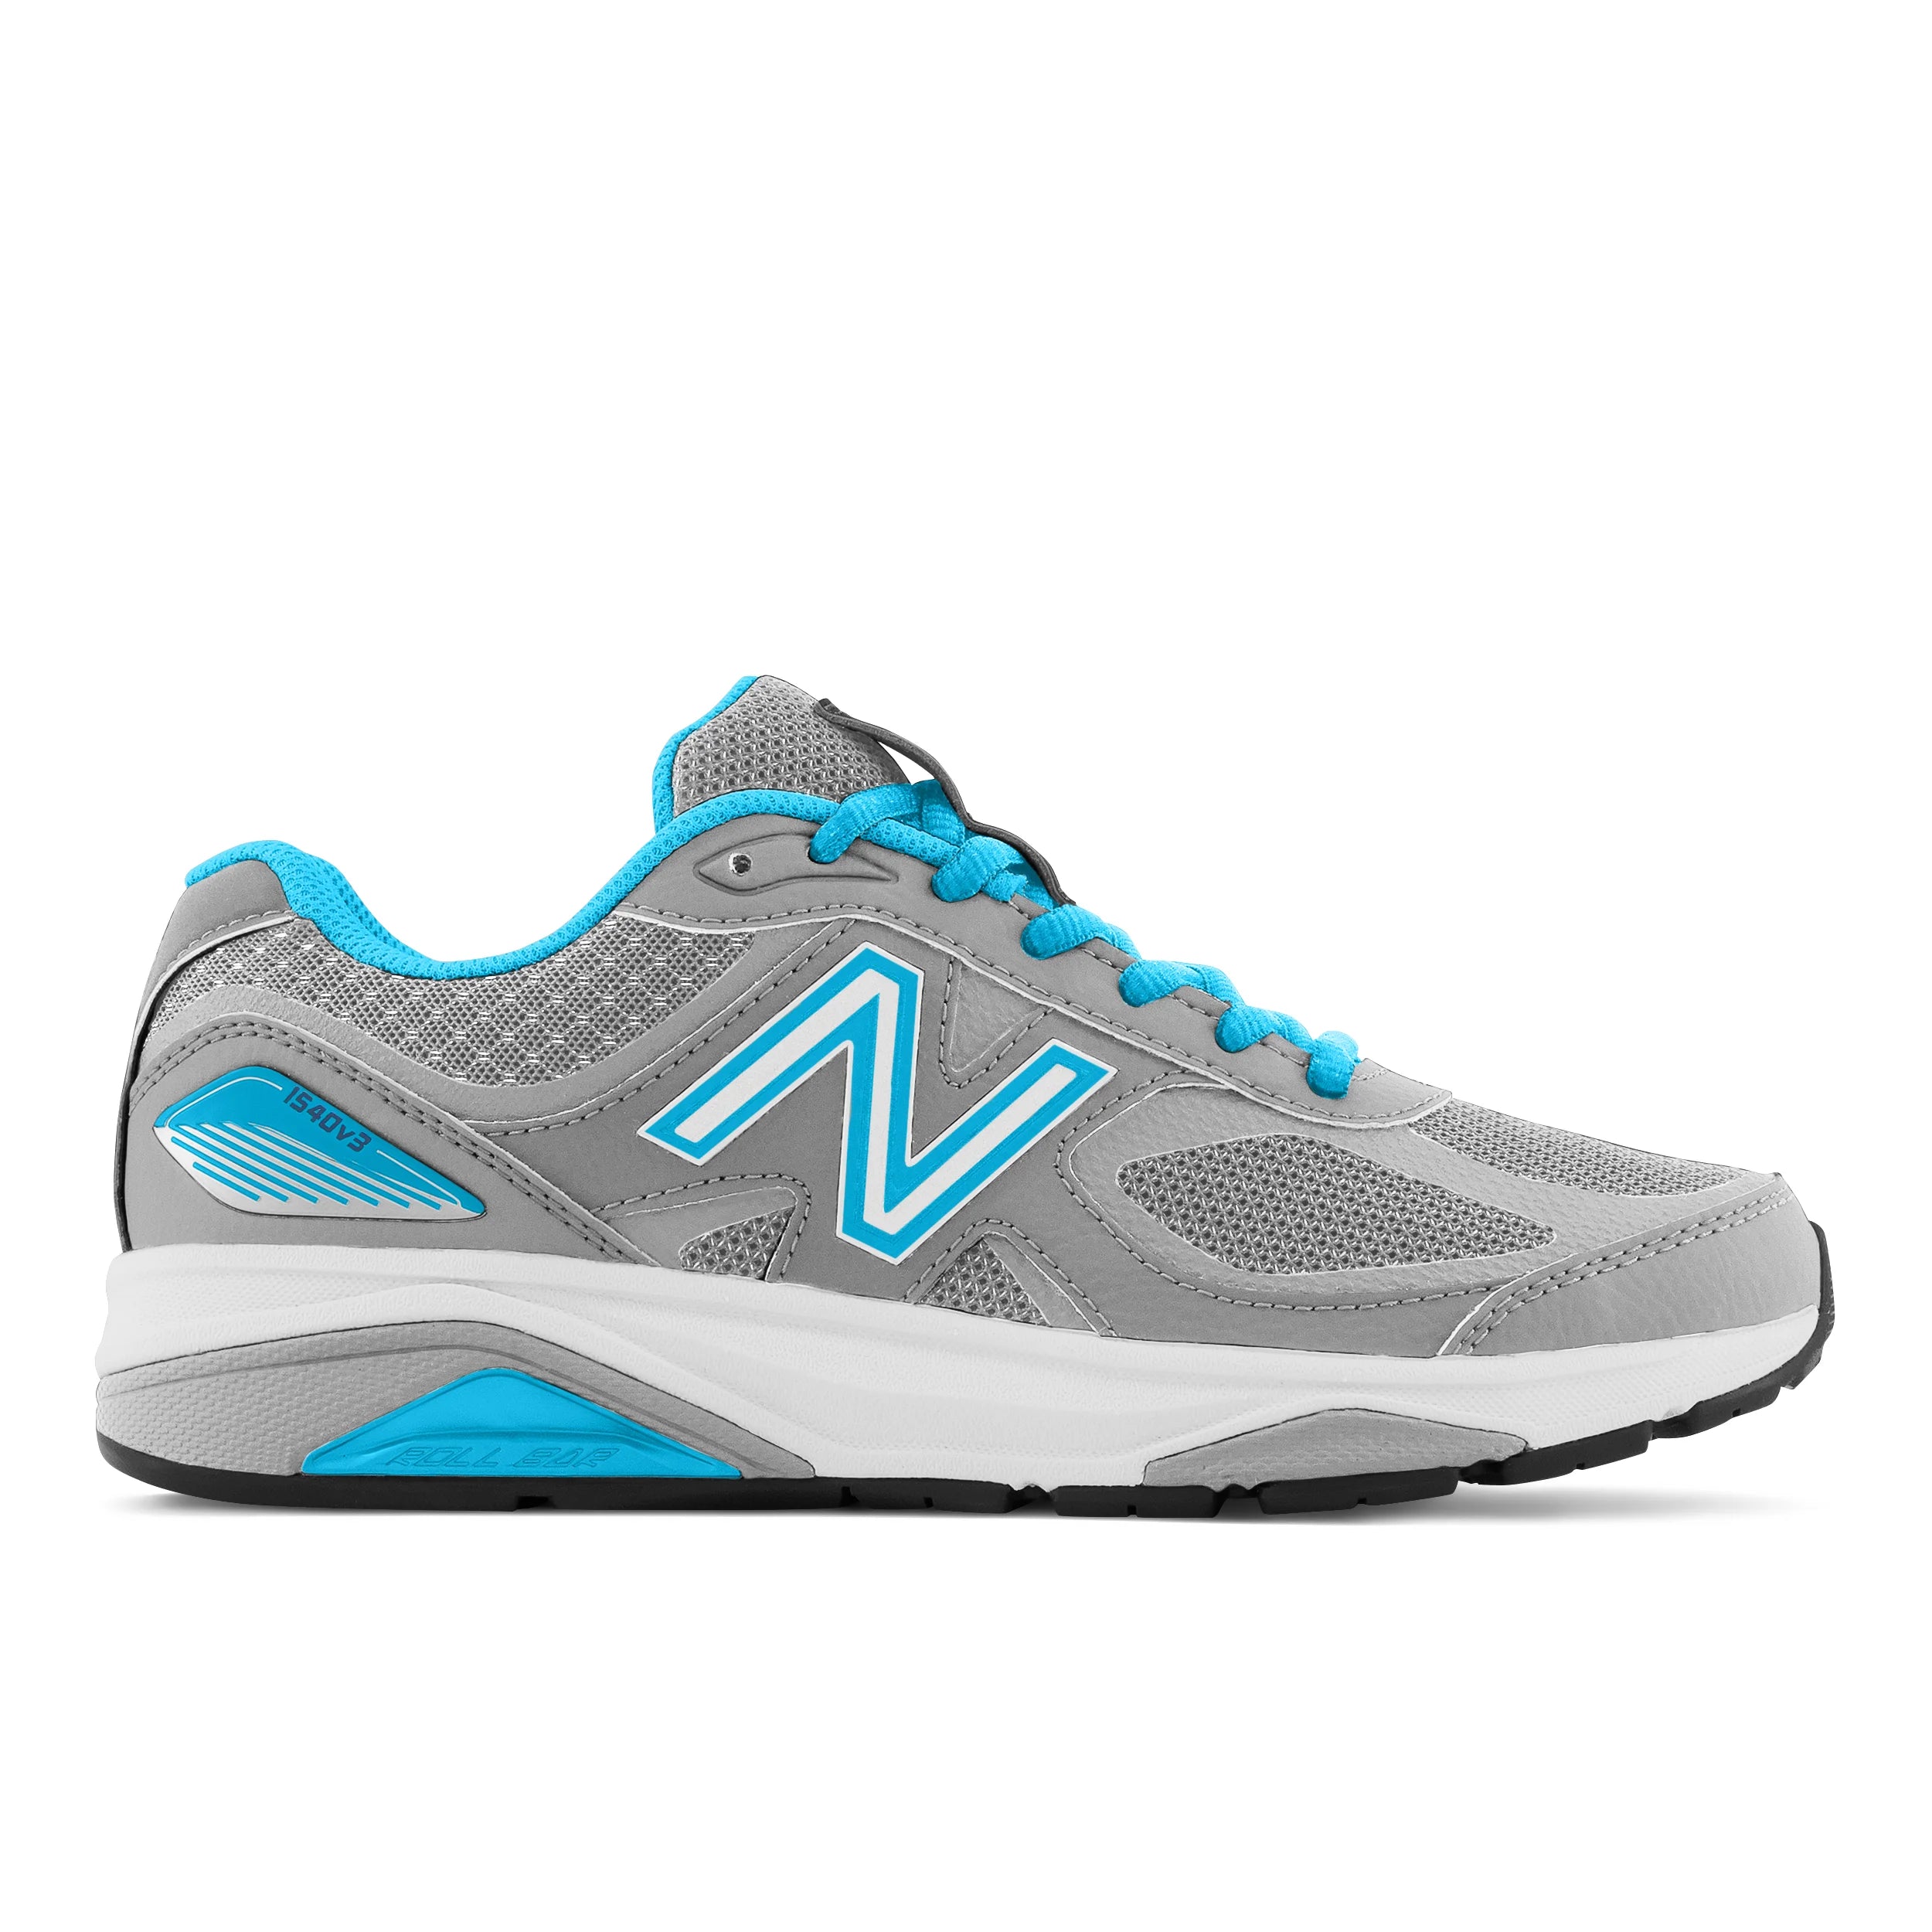 New Balance Women's 1540v3 Running Shoes in SILVER